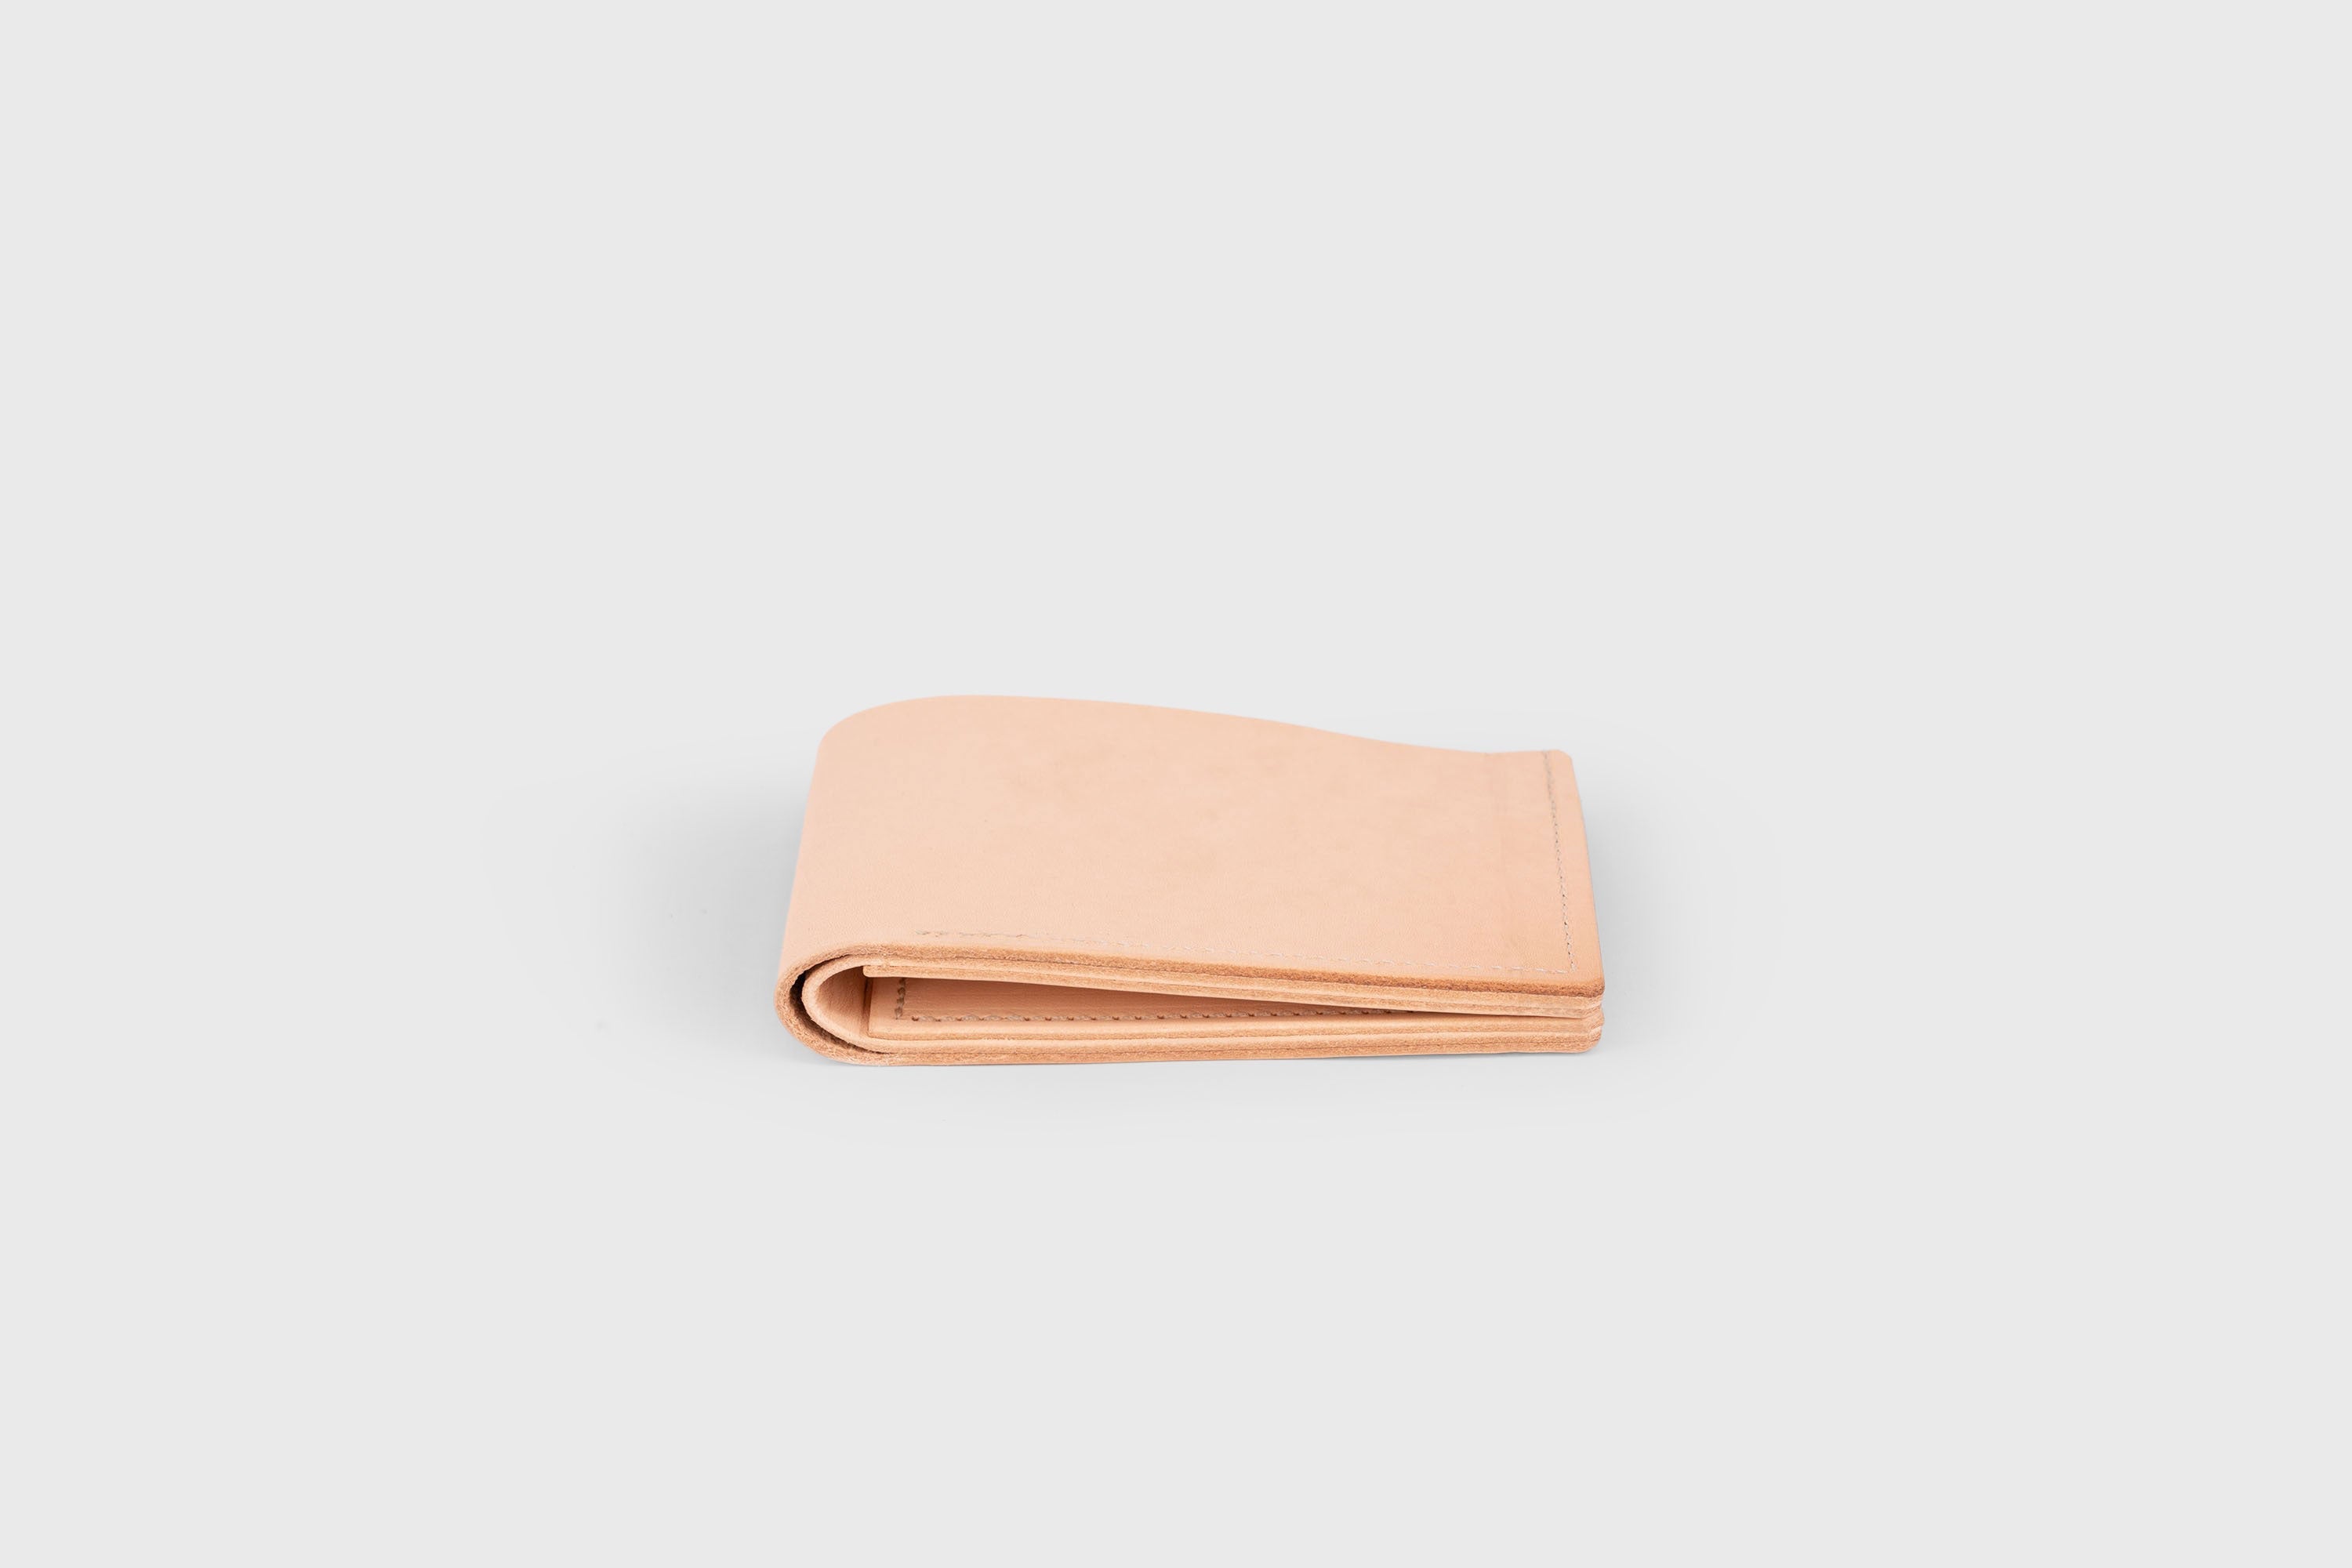 Bifold Wallet Natural Leather Vegetable Tanned Leather Premium Classic Design and Handcrafted By Atelier Madre Manuel Dreeesmann Barcelona Spain